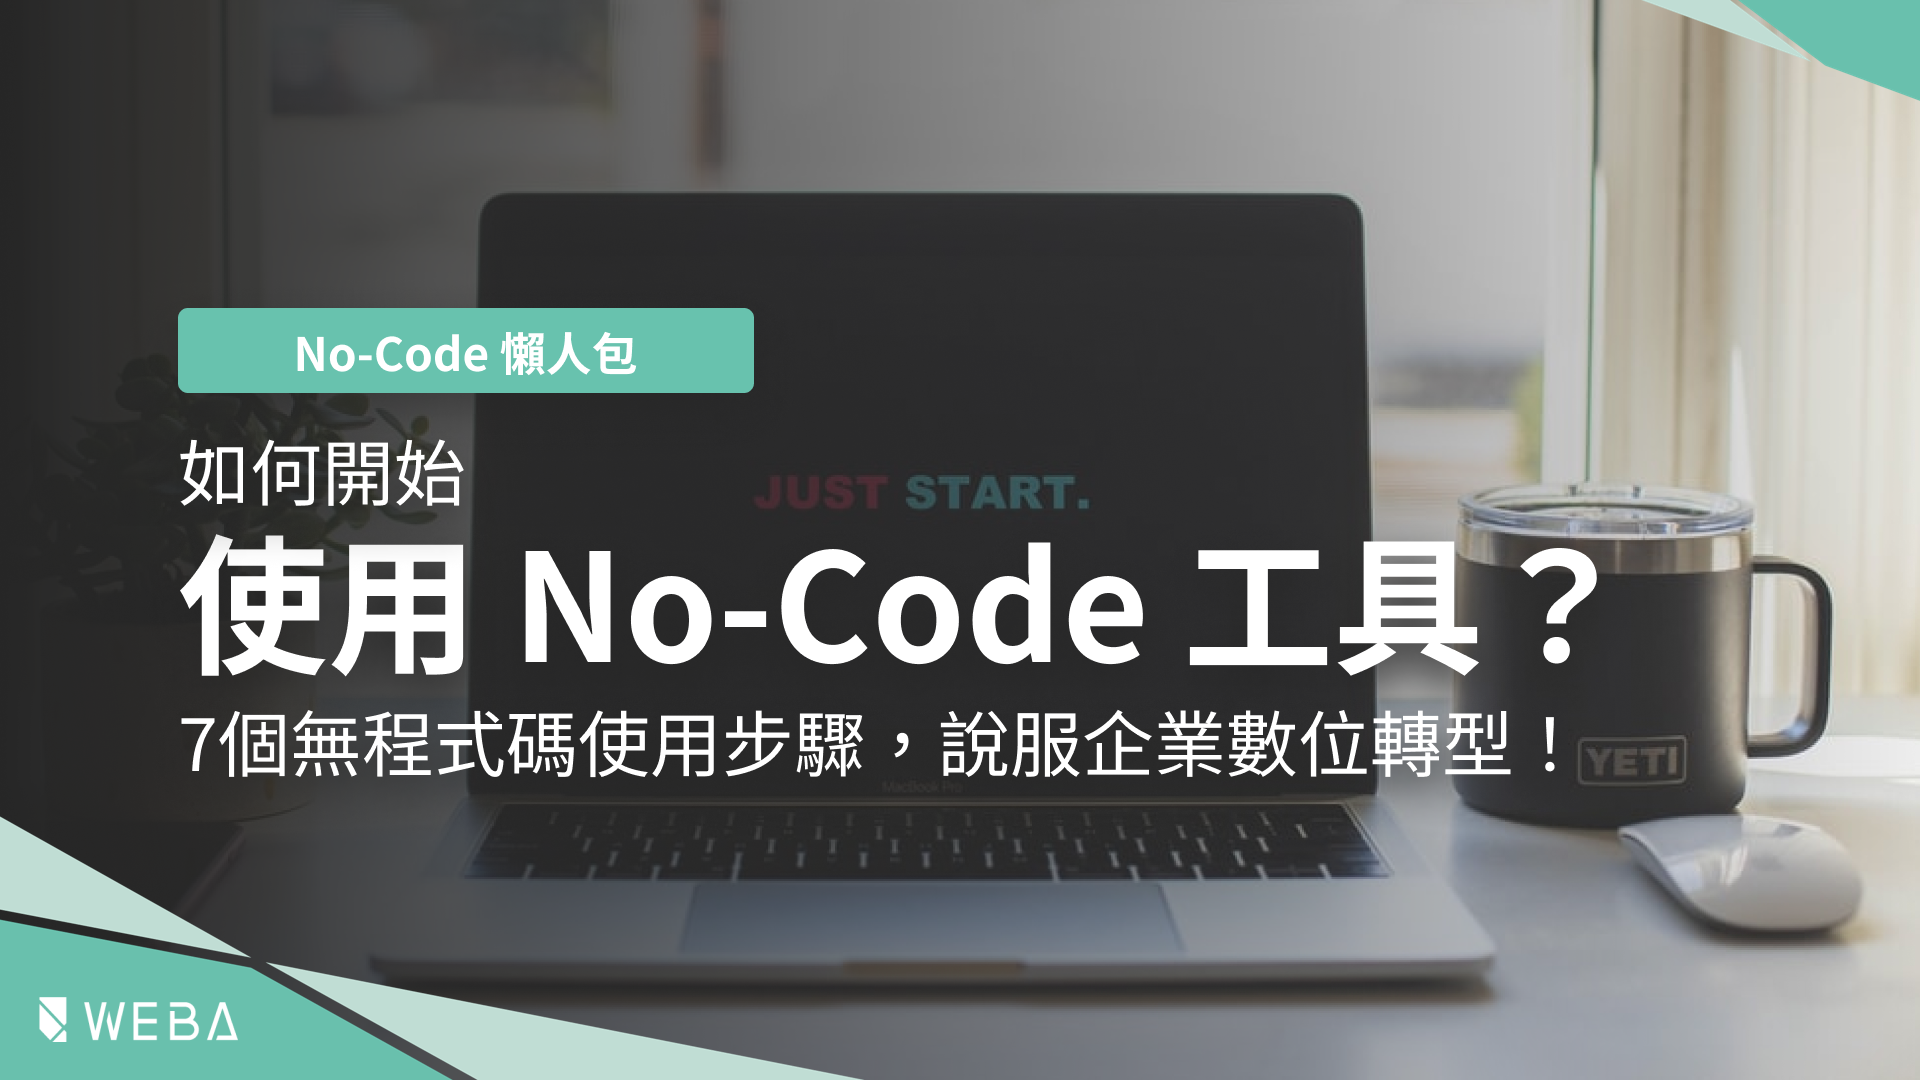 How to get started with the No-Code tool